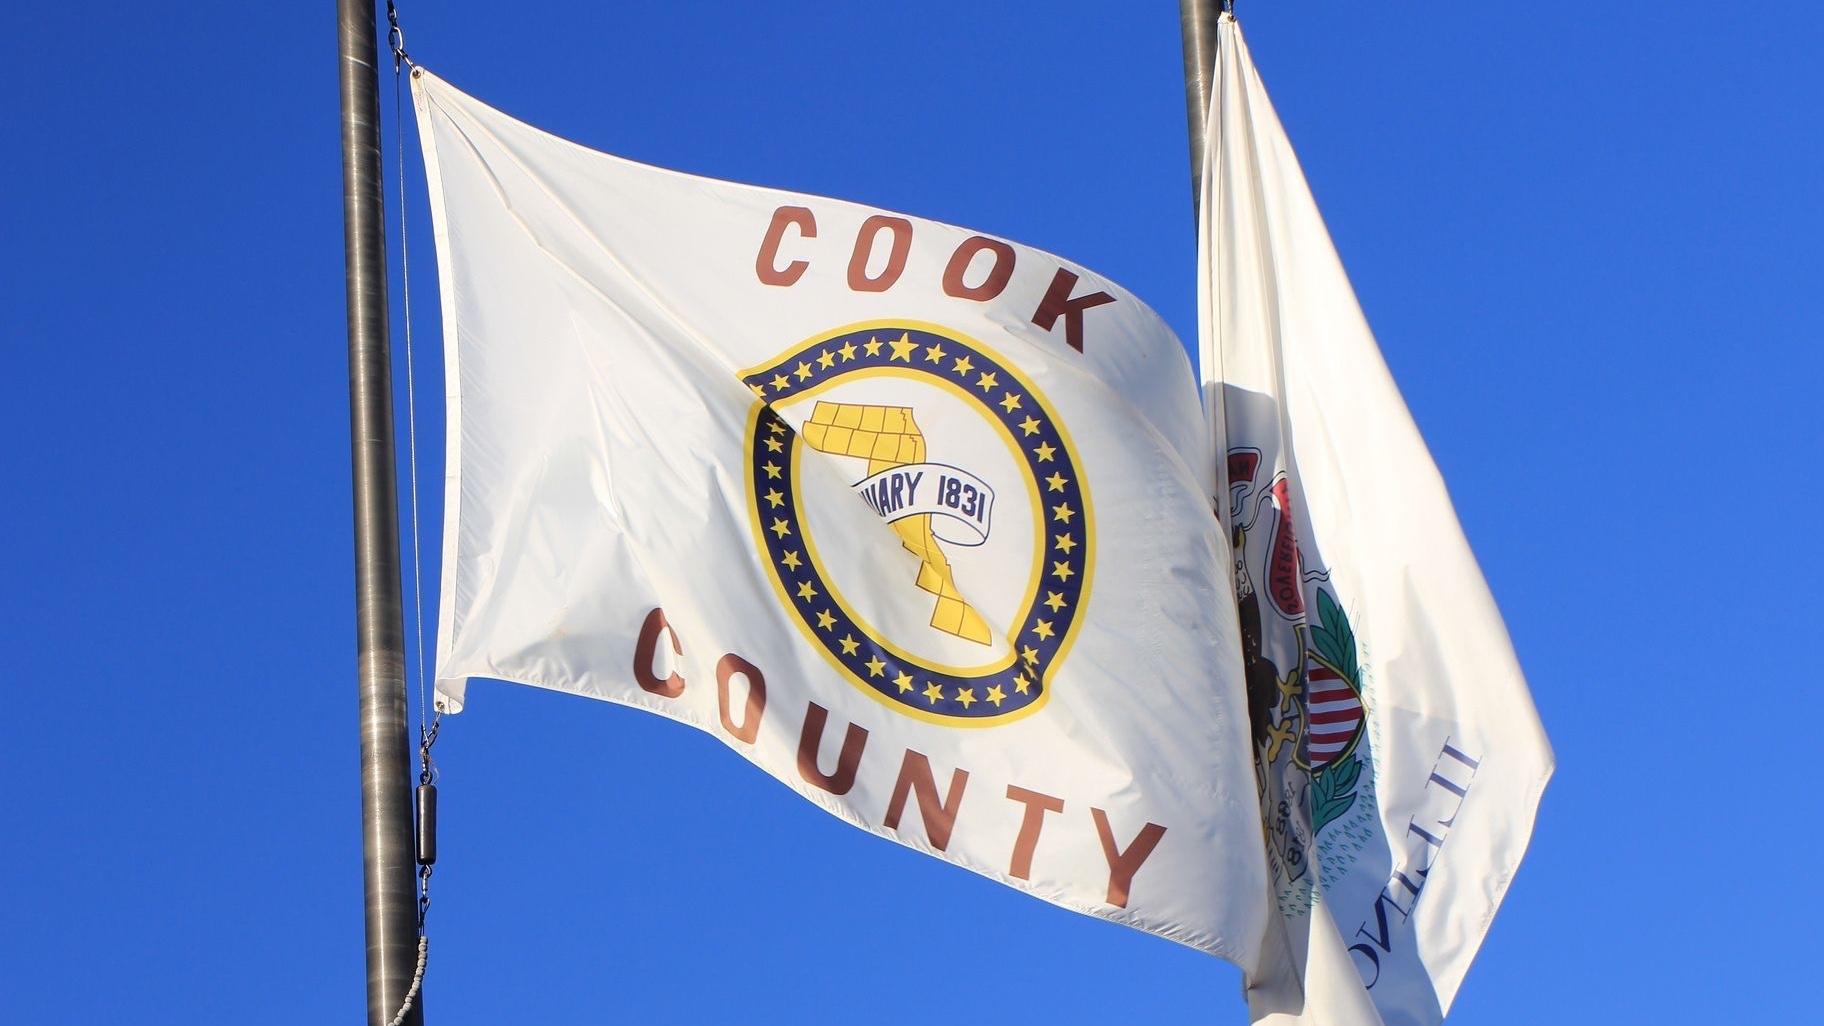 Cook County’s flag was designed in 1961 and has been described as “a seal on a bedsheet.” (Cook County Government)